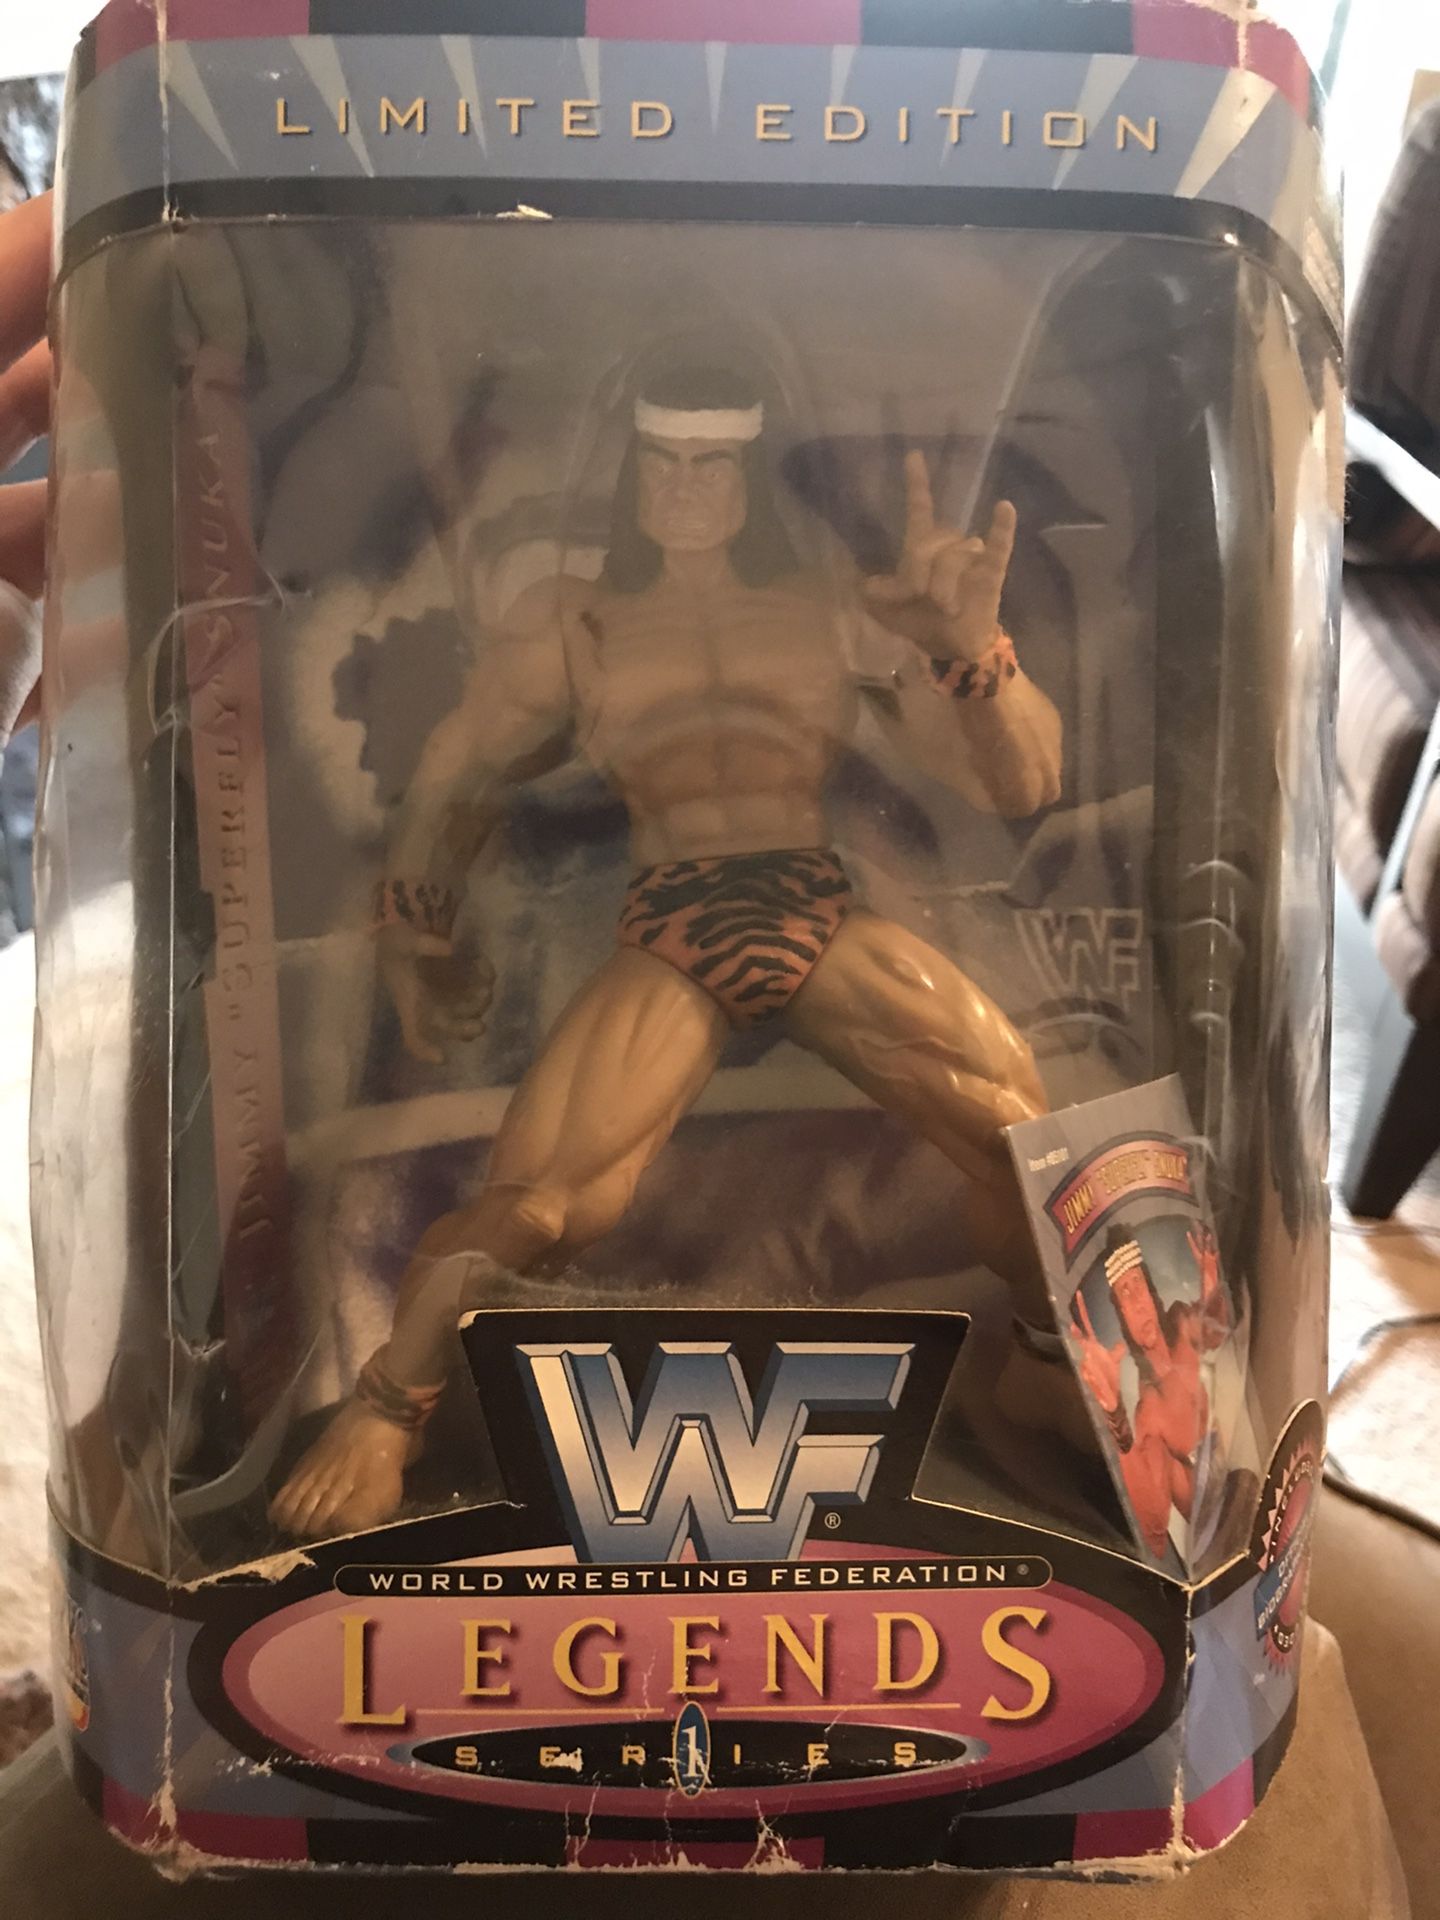 WWE limited edition action figure from 1997!